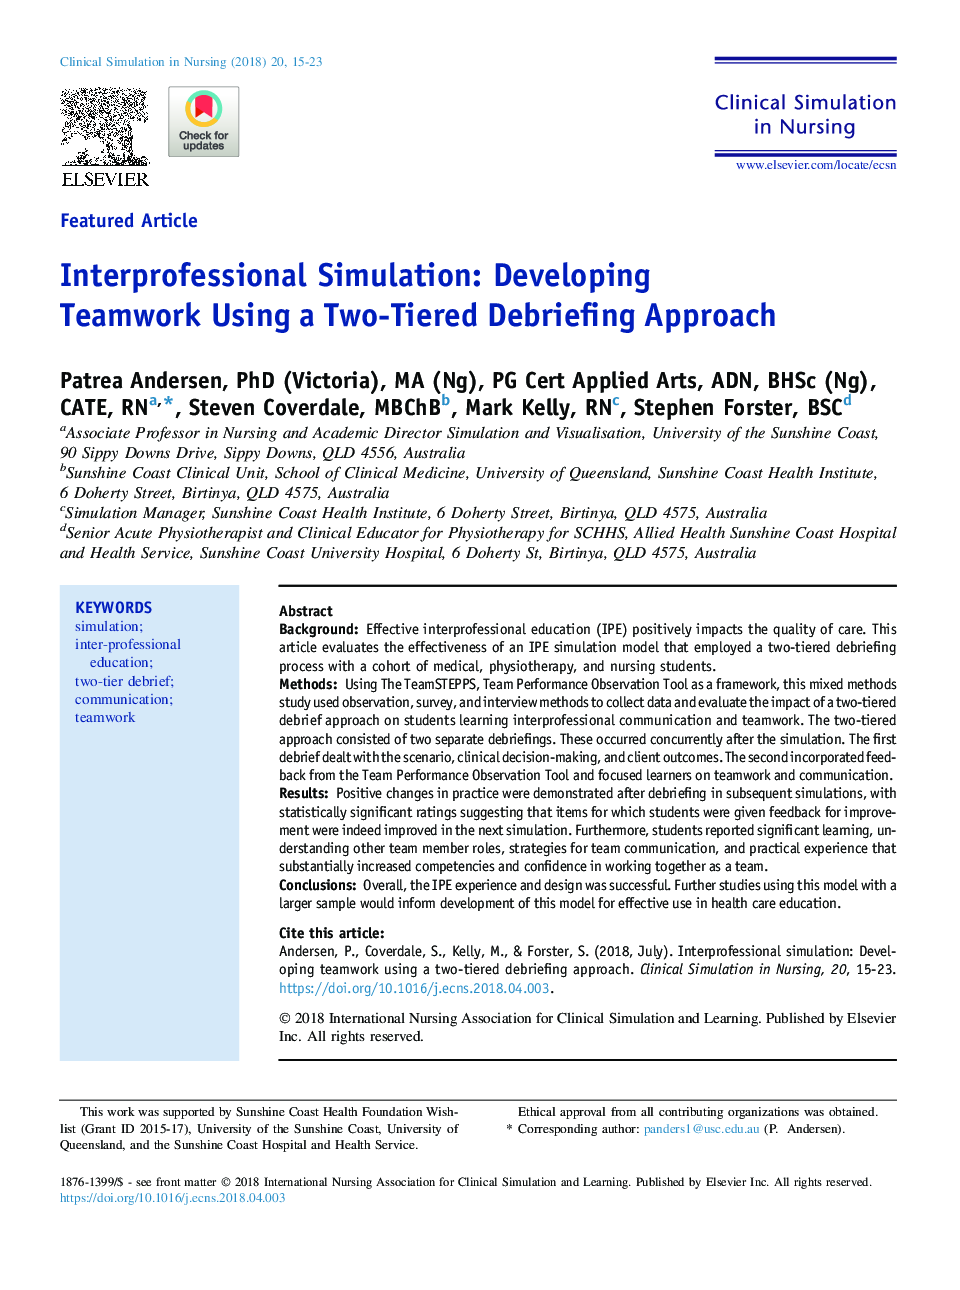 Interprofessional Simulation: Developing Teamwork Using a Two-Tiered Debriefing Approach